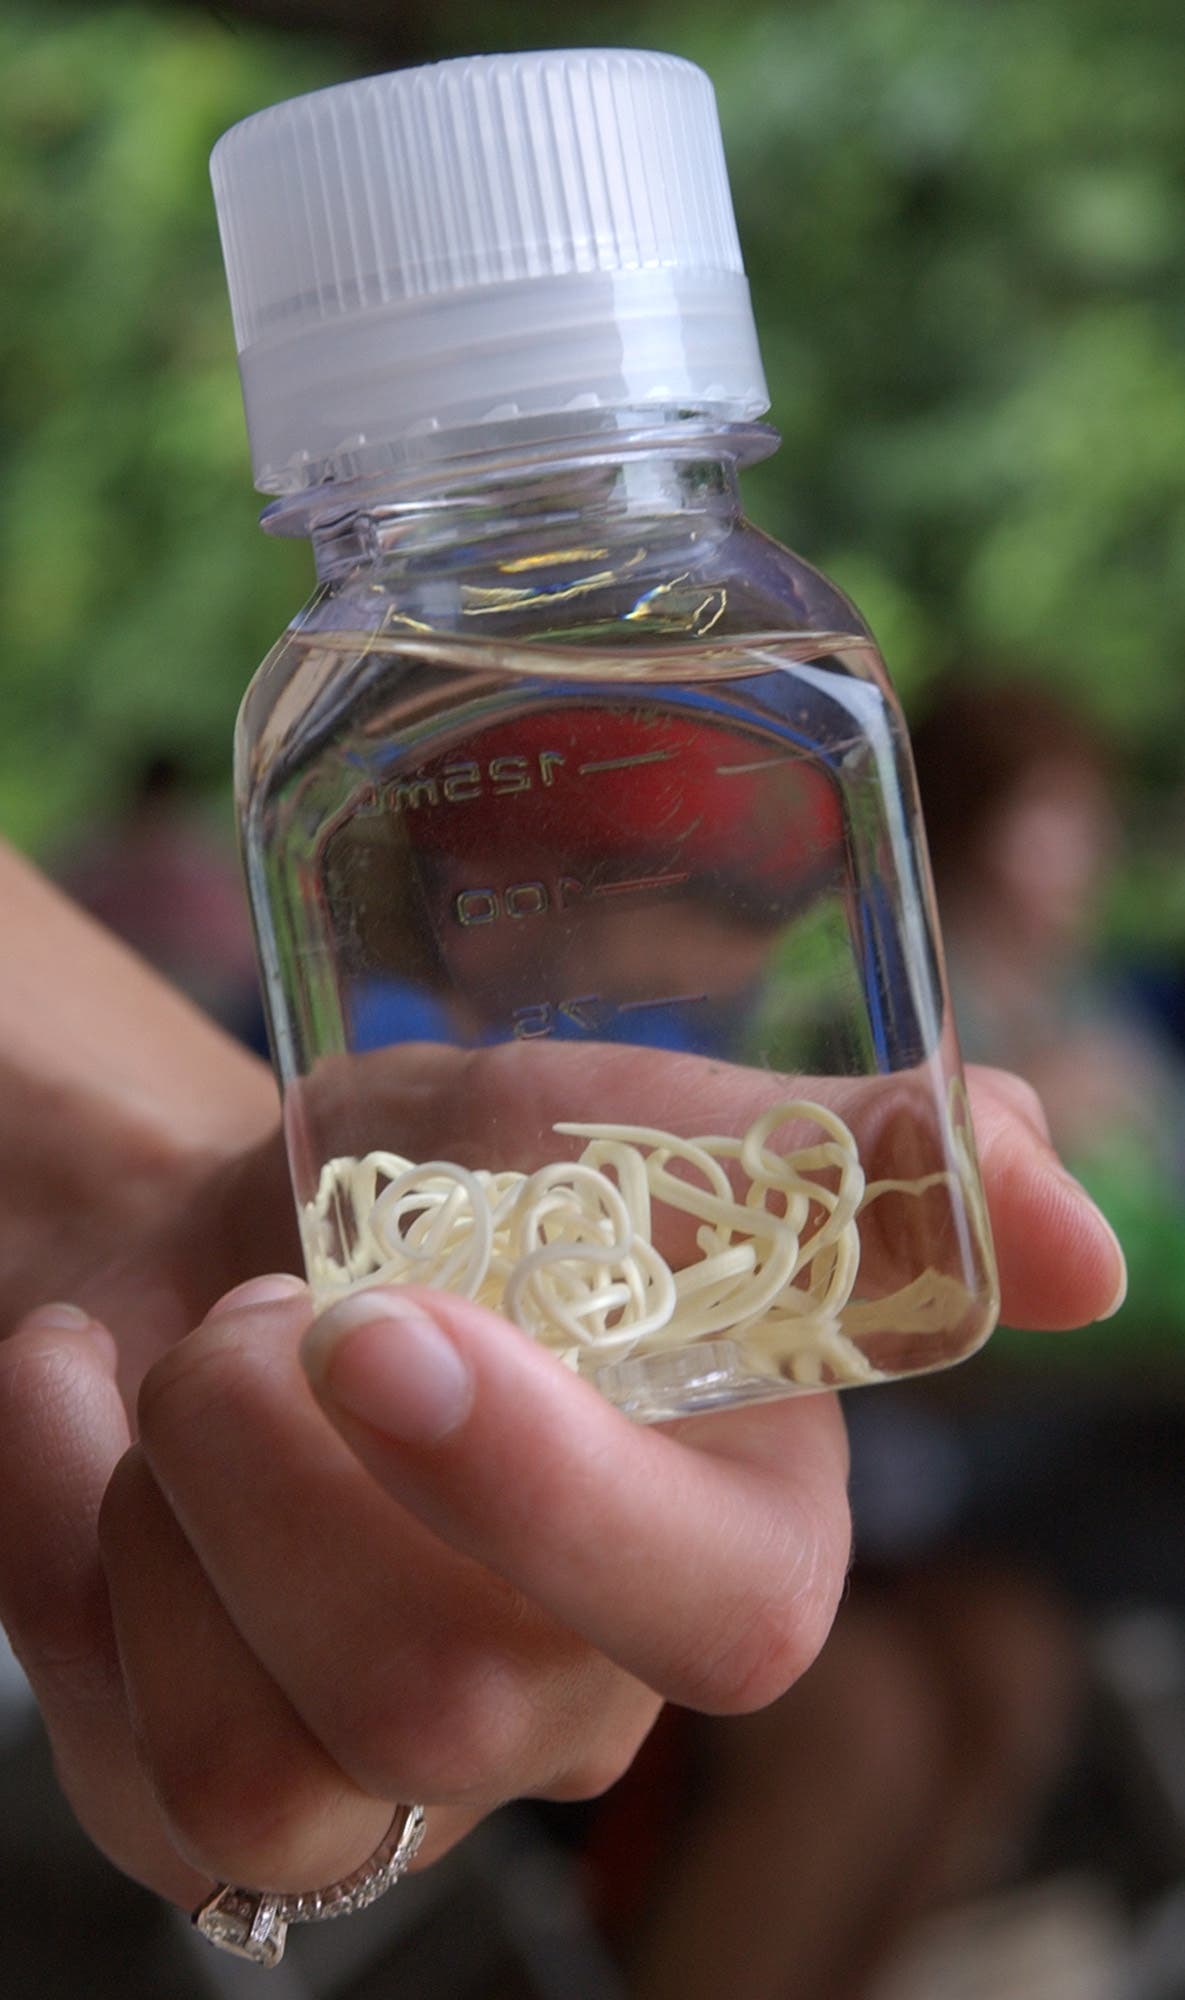 A jar containing Guinea worms shown in Atlanta in 2004. (File photo: AP)